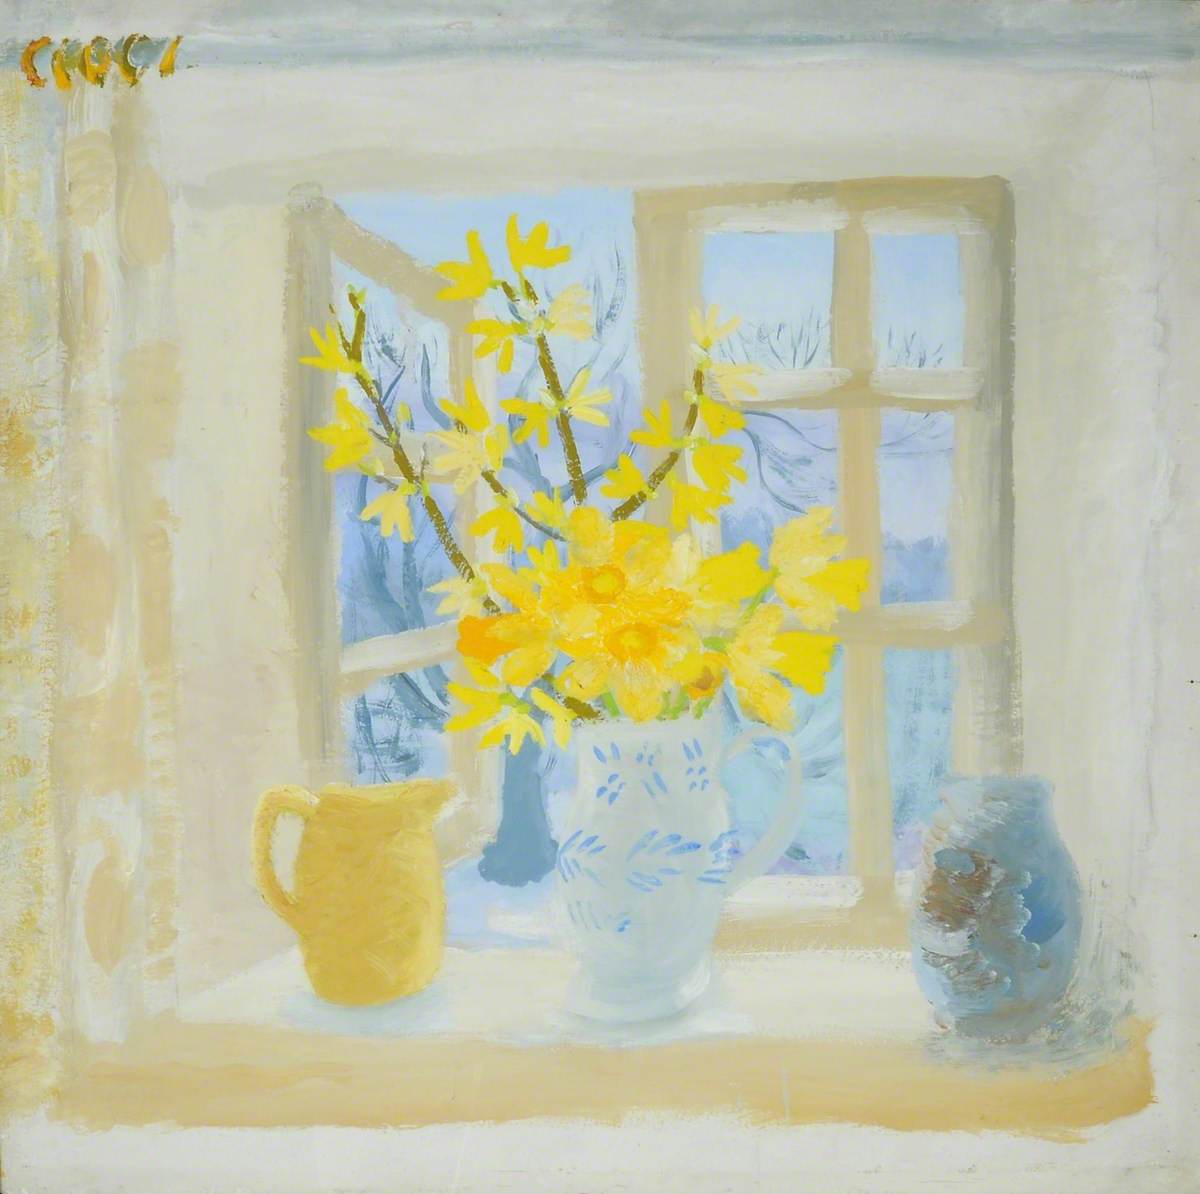 It’s #Spring, and we couldn’t resist sharing Winifred Nicholson’s gorgeous ‘Easter Monday’ windowsill from @TullieCarlisle 🐣💐 We love the vibrancy of the daffodils and complementary blue hues as Nicholson creates a sense of joy at the coming of spring! #OnlineArtExchange